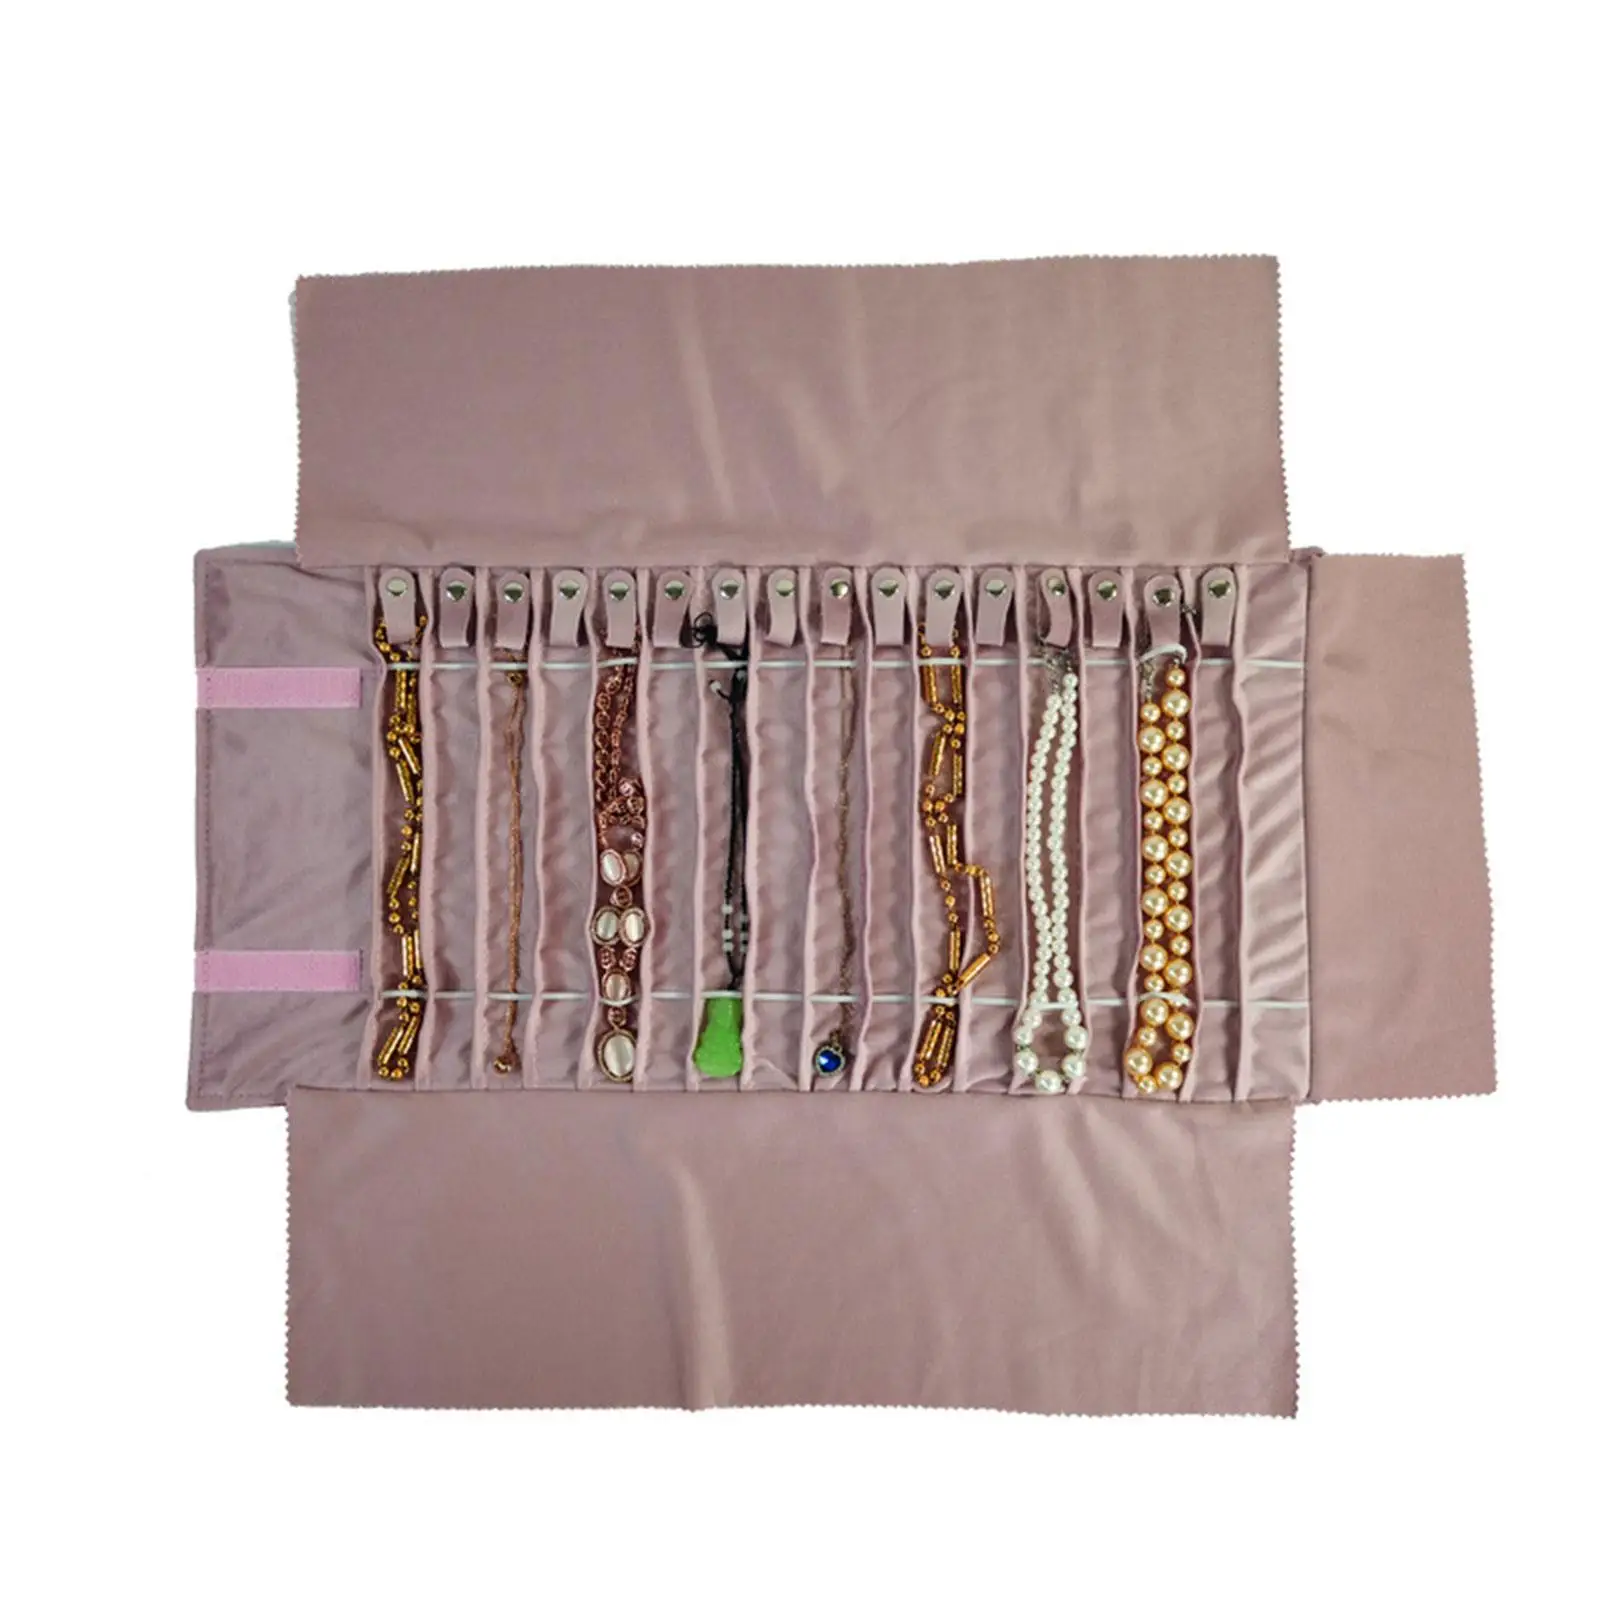 Jewelry Roll Bag Necklace Collection Bag Lightweight Travel Jewelry Case